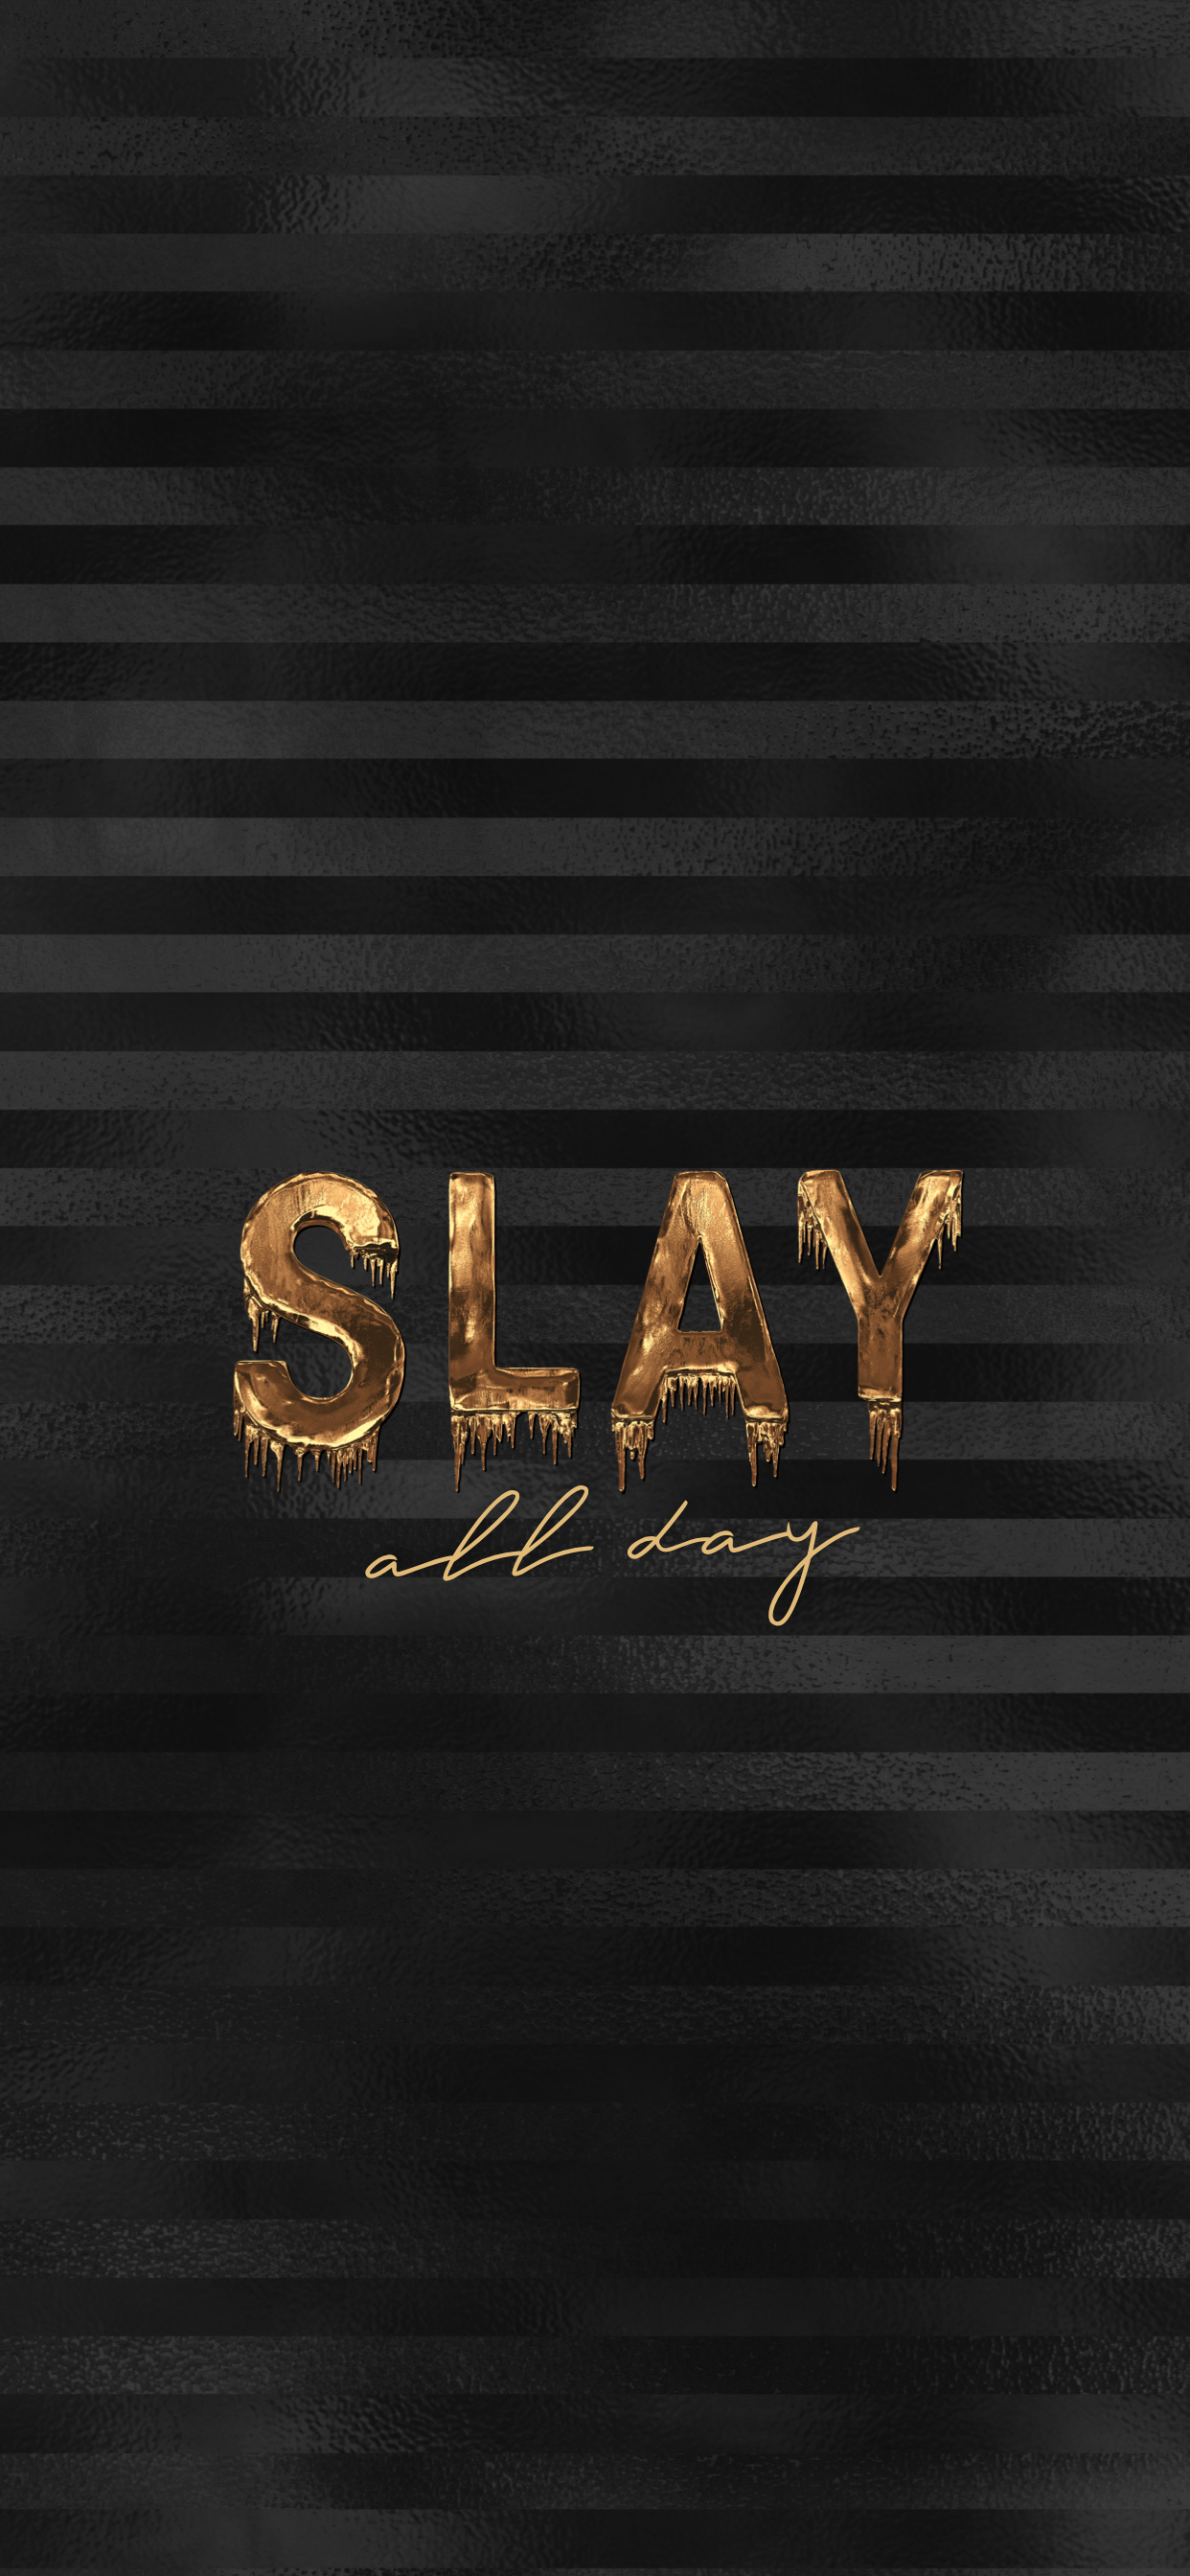 Top more than 57 slay wallpapers - in.cdgdbentre